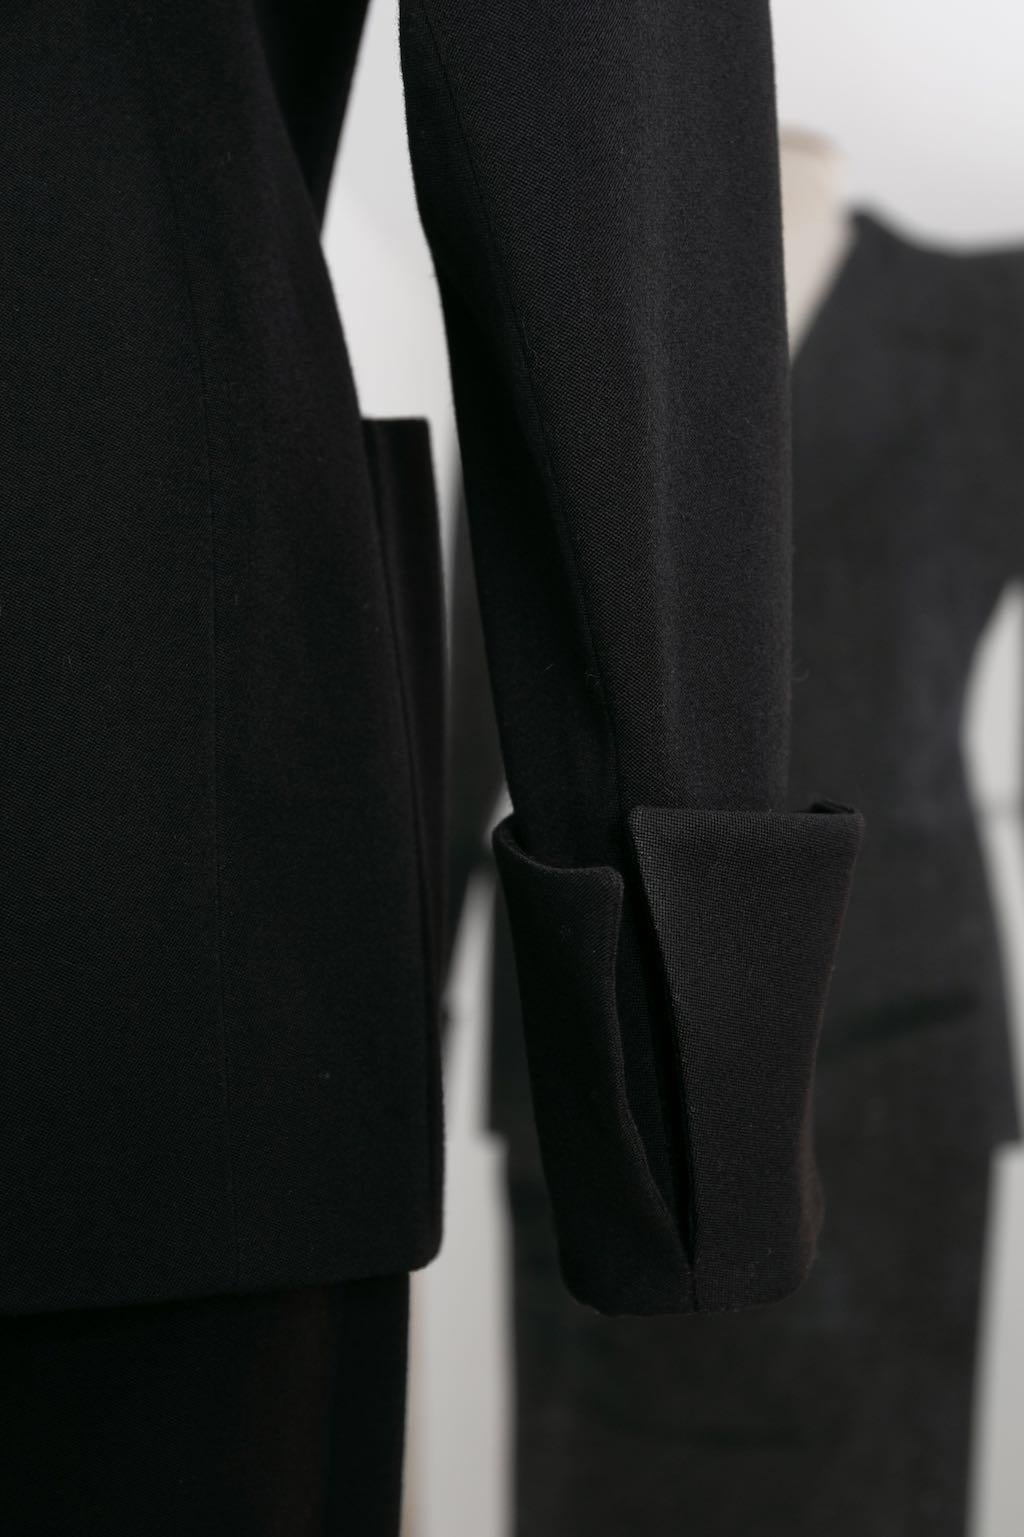 Yves Saint Laurent - Tuxedo set in black wool gabardine. Circa 1981/1982. Ribbon N°63117. No composition or size tag, it fits a size 36FR.

Additional information:
Condition: Very good condition
Dimensions: Jacket: Shoulders: 51 cm (20.08